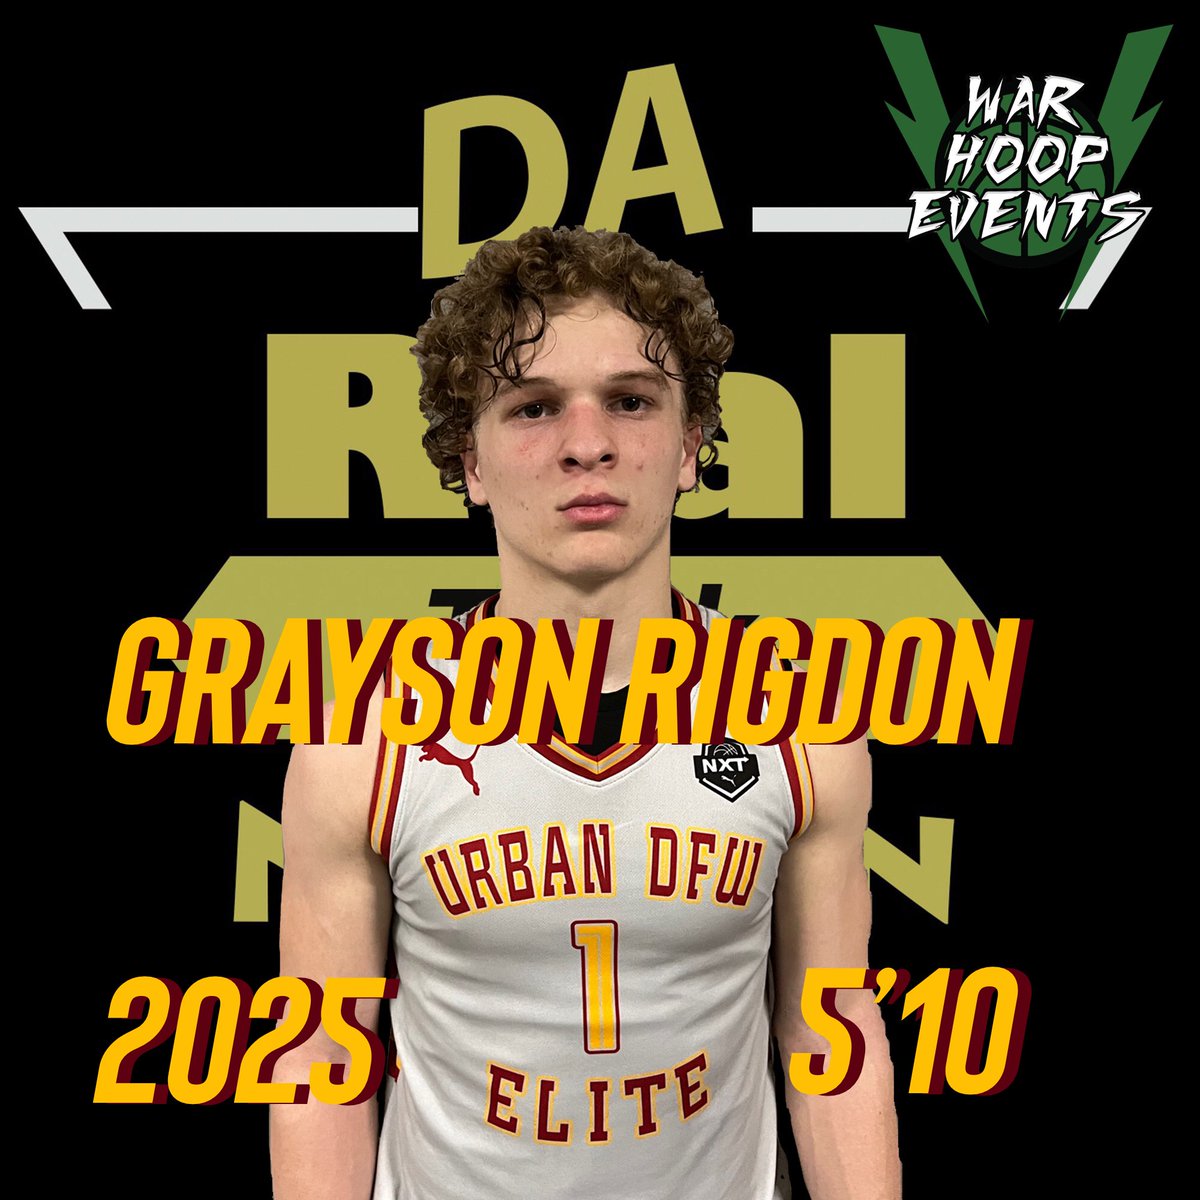 @Warb4storm @AssaultSouthern @FrancisChuk7 @Warb4storm 2024 recap: @URBANDFWELITE guard @graysonrigdon1 @JaytonBB might be a secret to you but he’s is no secret to TEXAS TECH 🏈AND 🏀, nor is an unknown in @uiltexas state championship; kid get buckets & TD’s like its nothing; stay tuned on this one #DaREALtalkNation